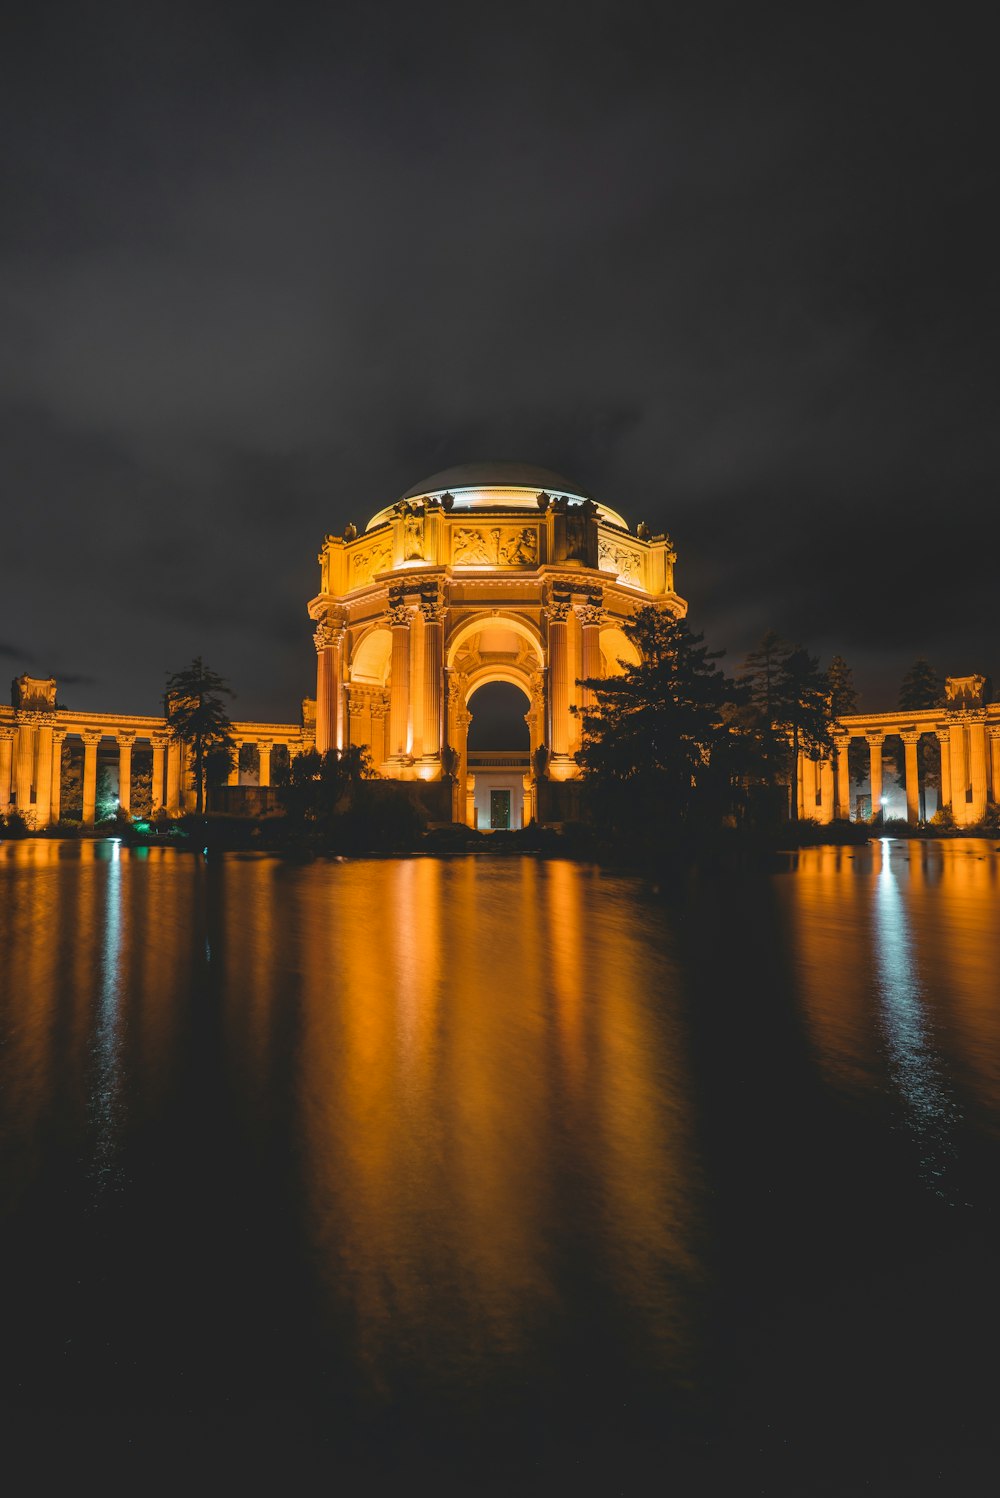 Palace of Fine Arts during night time